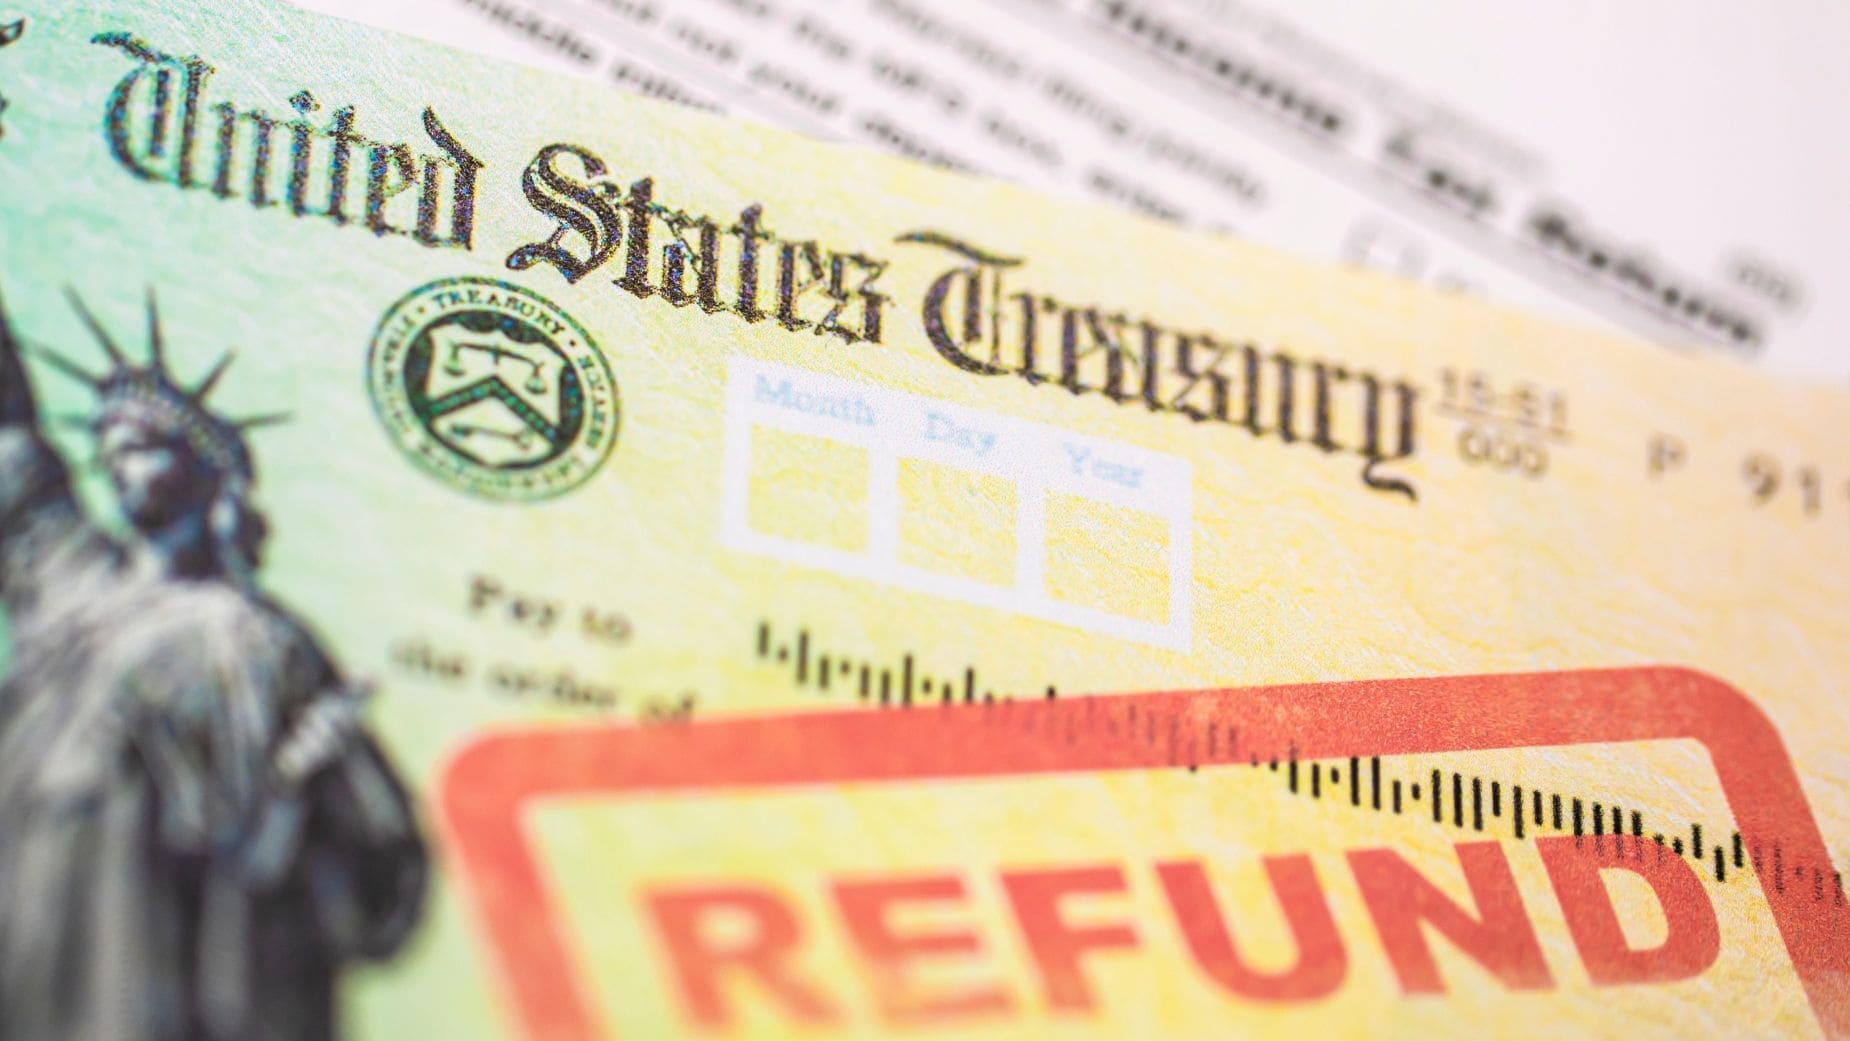 You can know where your Tax Refund is with this IRS tool